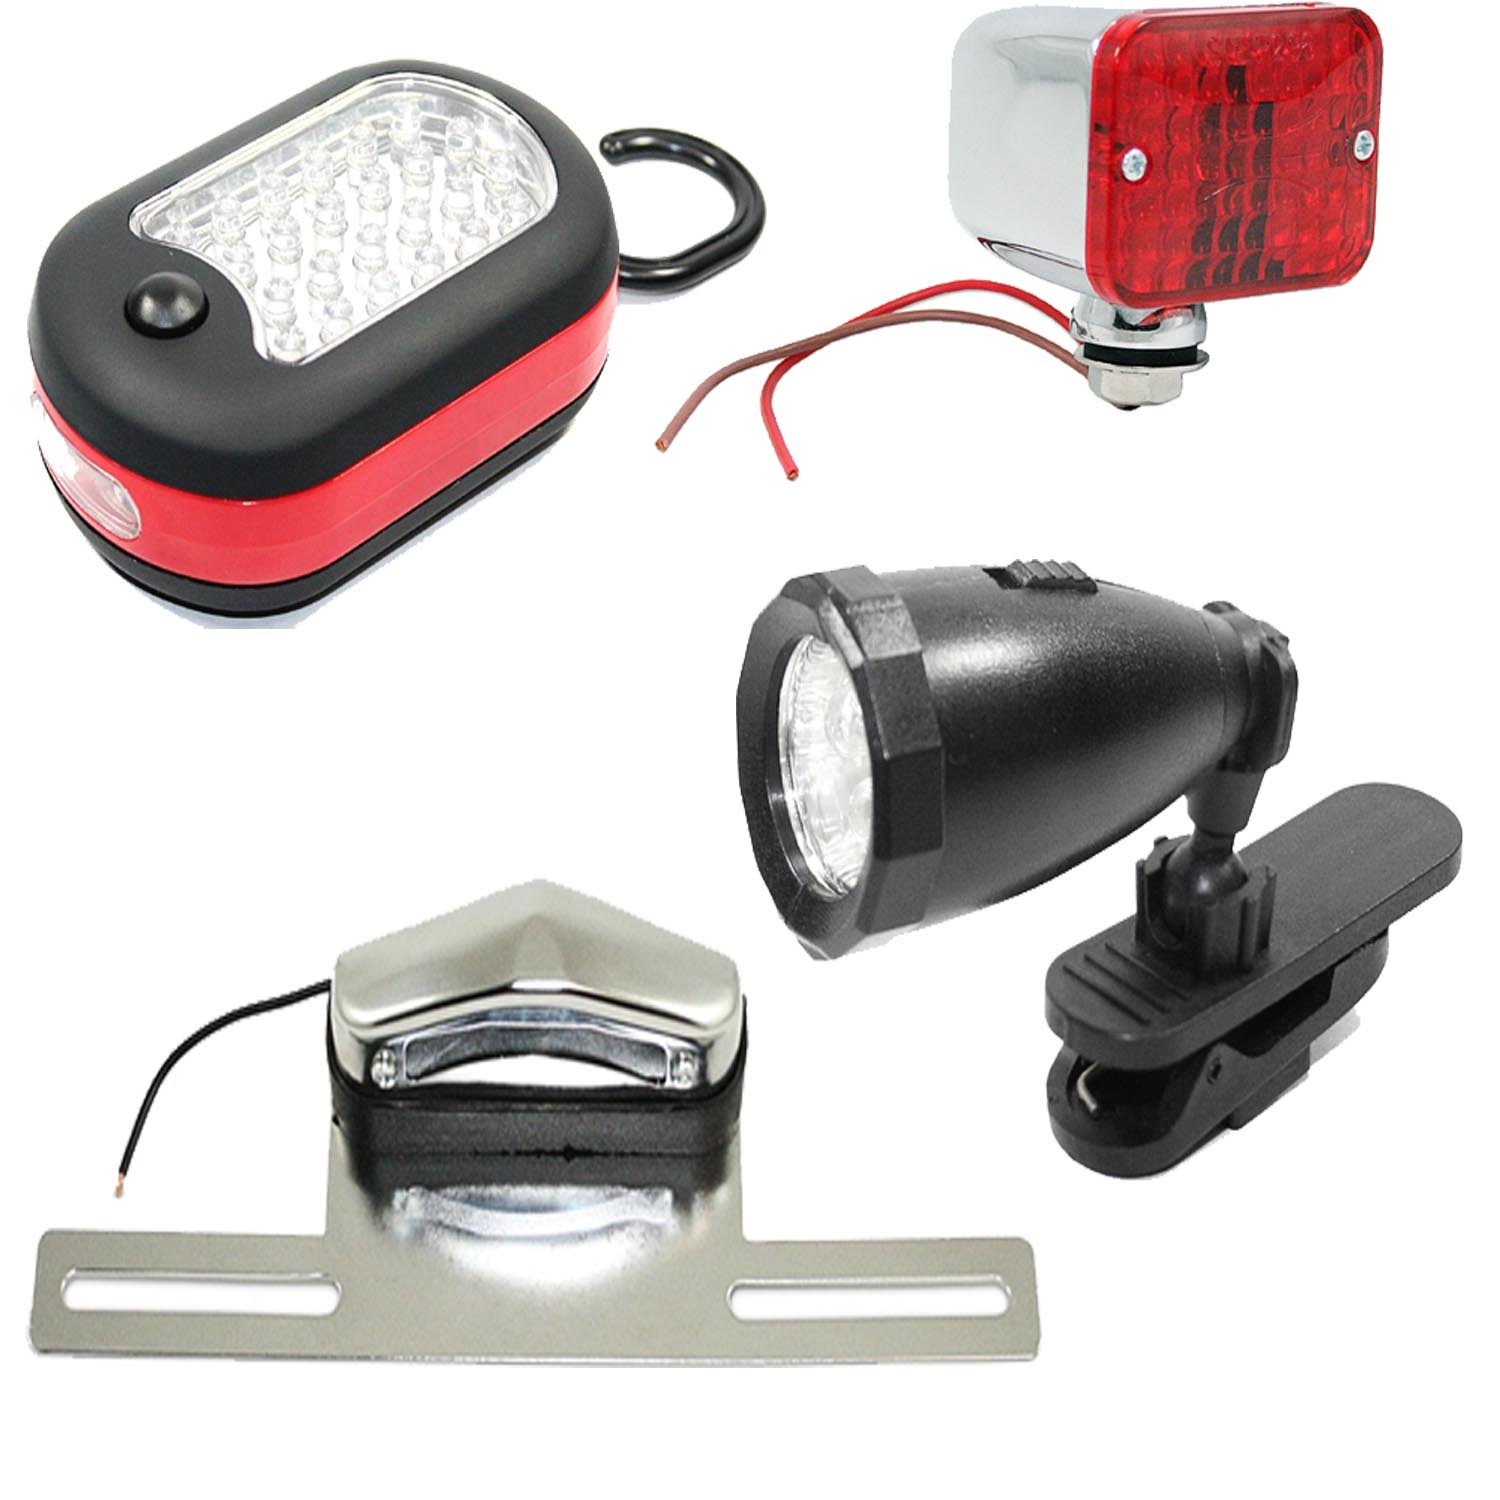 Other Lighting Products